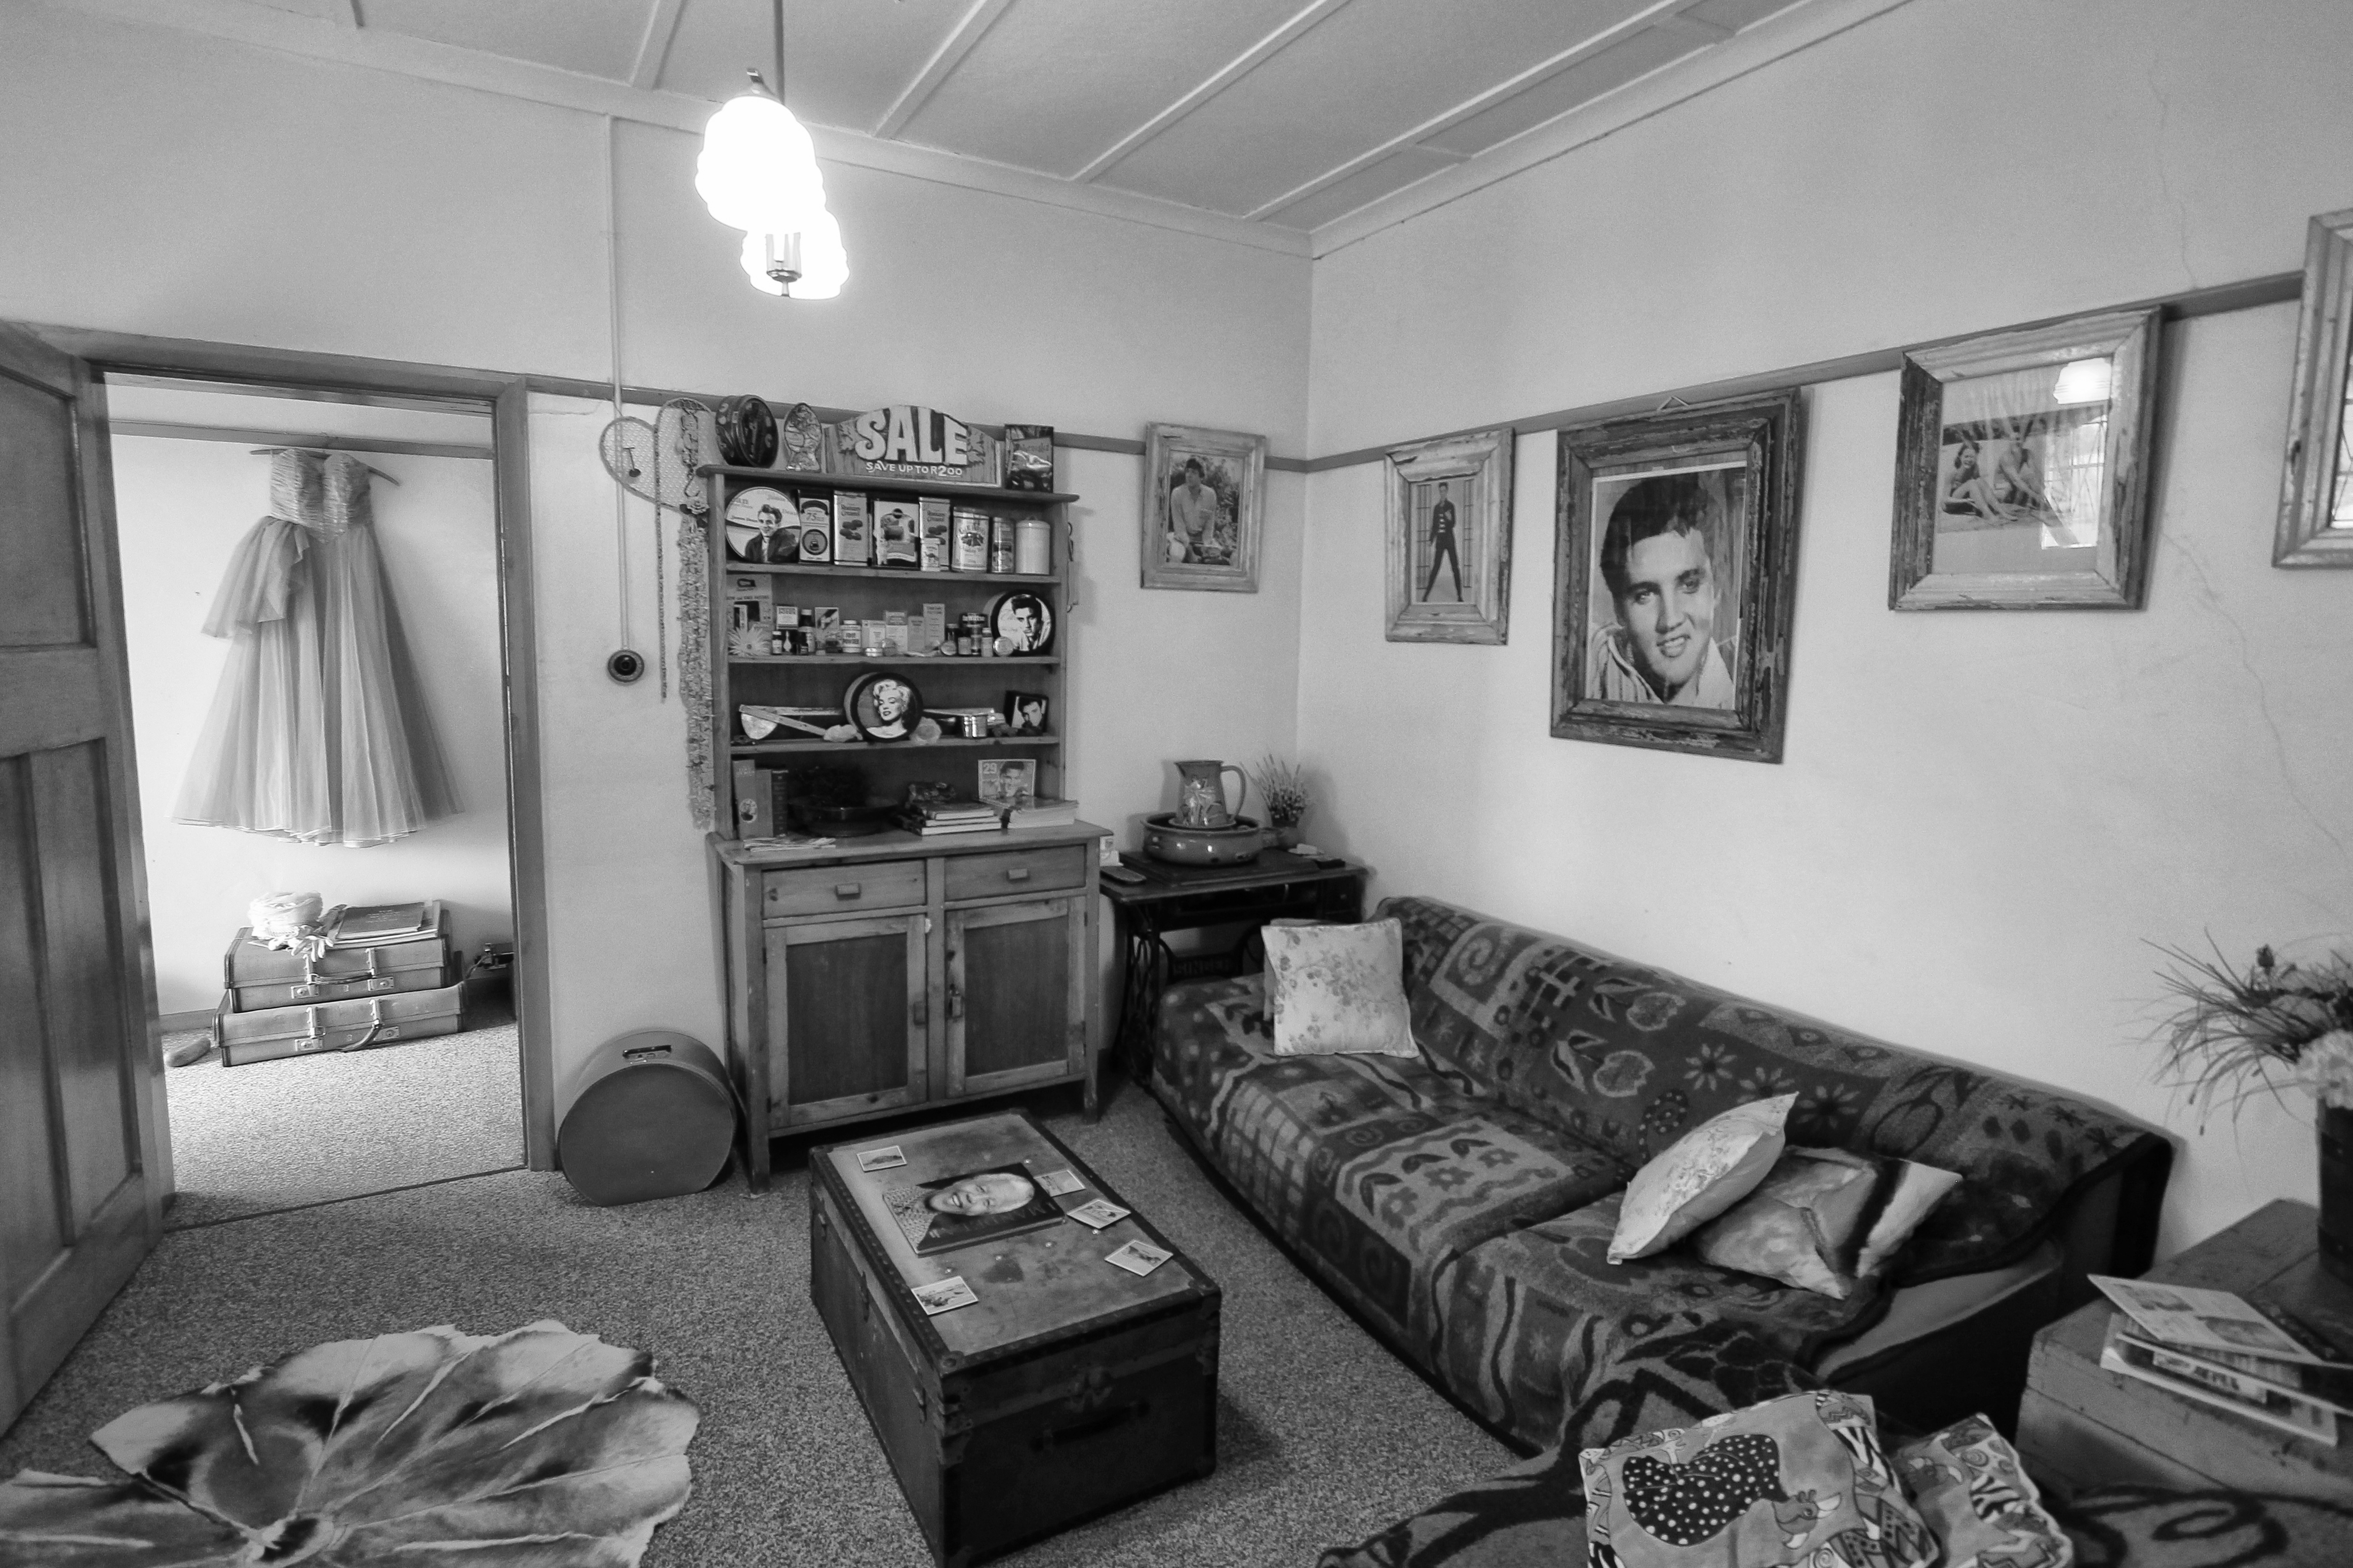 Elvis, James Dean and Marilyn rule in the sitting room of The Casablanca. Image: Chris Marais 